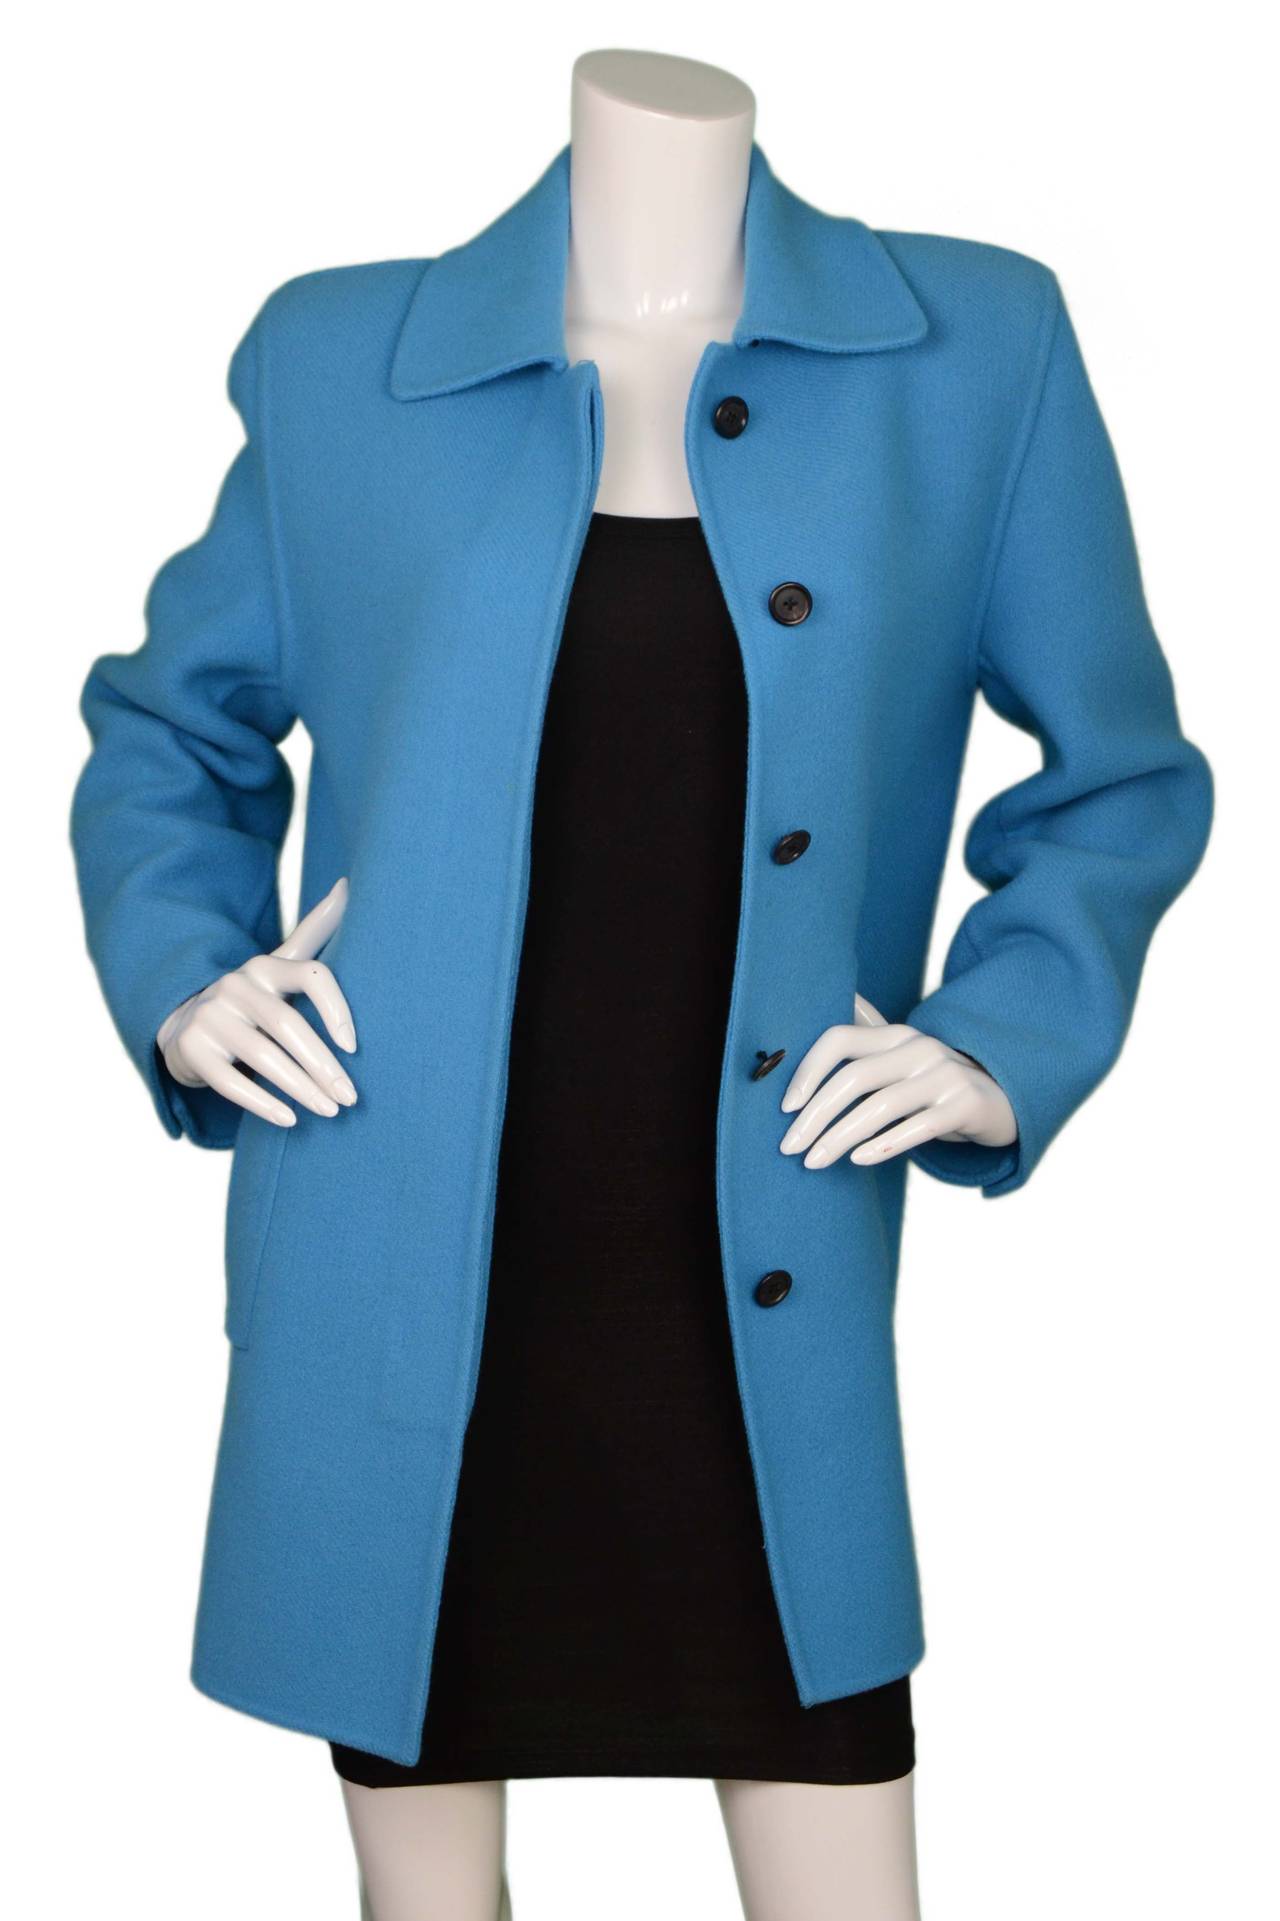 Marc Jacobs Blue Wool Swing Coat
Color: Blue
Composition: 100% Wool
Lining: None
Closure/Opening: Button down front
Exterior Pockets: Two hip slit pockets
Interior Pockets: None
Overall Condition: Excellent pre-owned condition with the